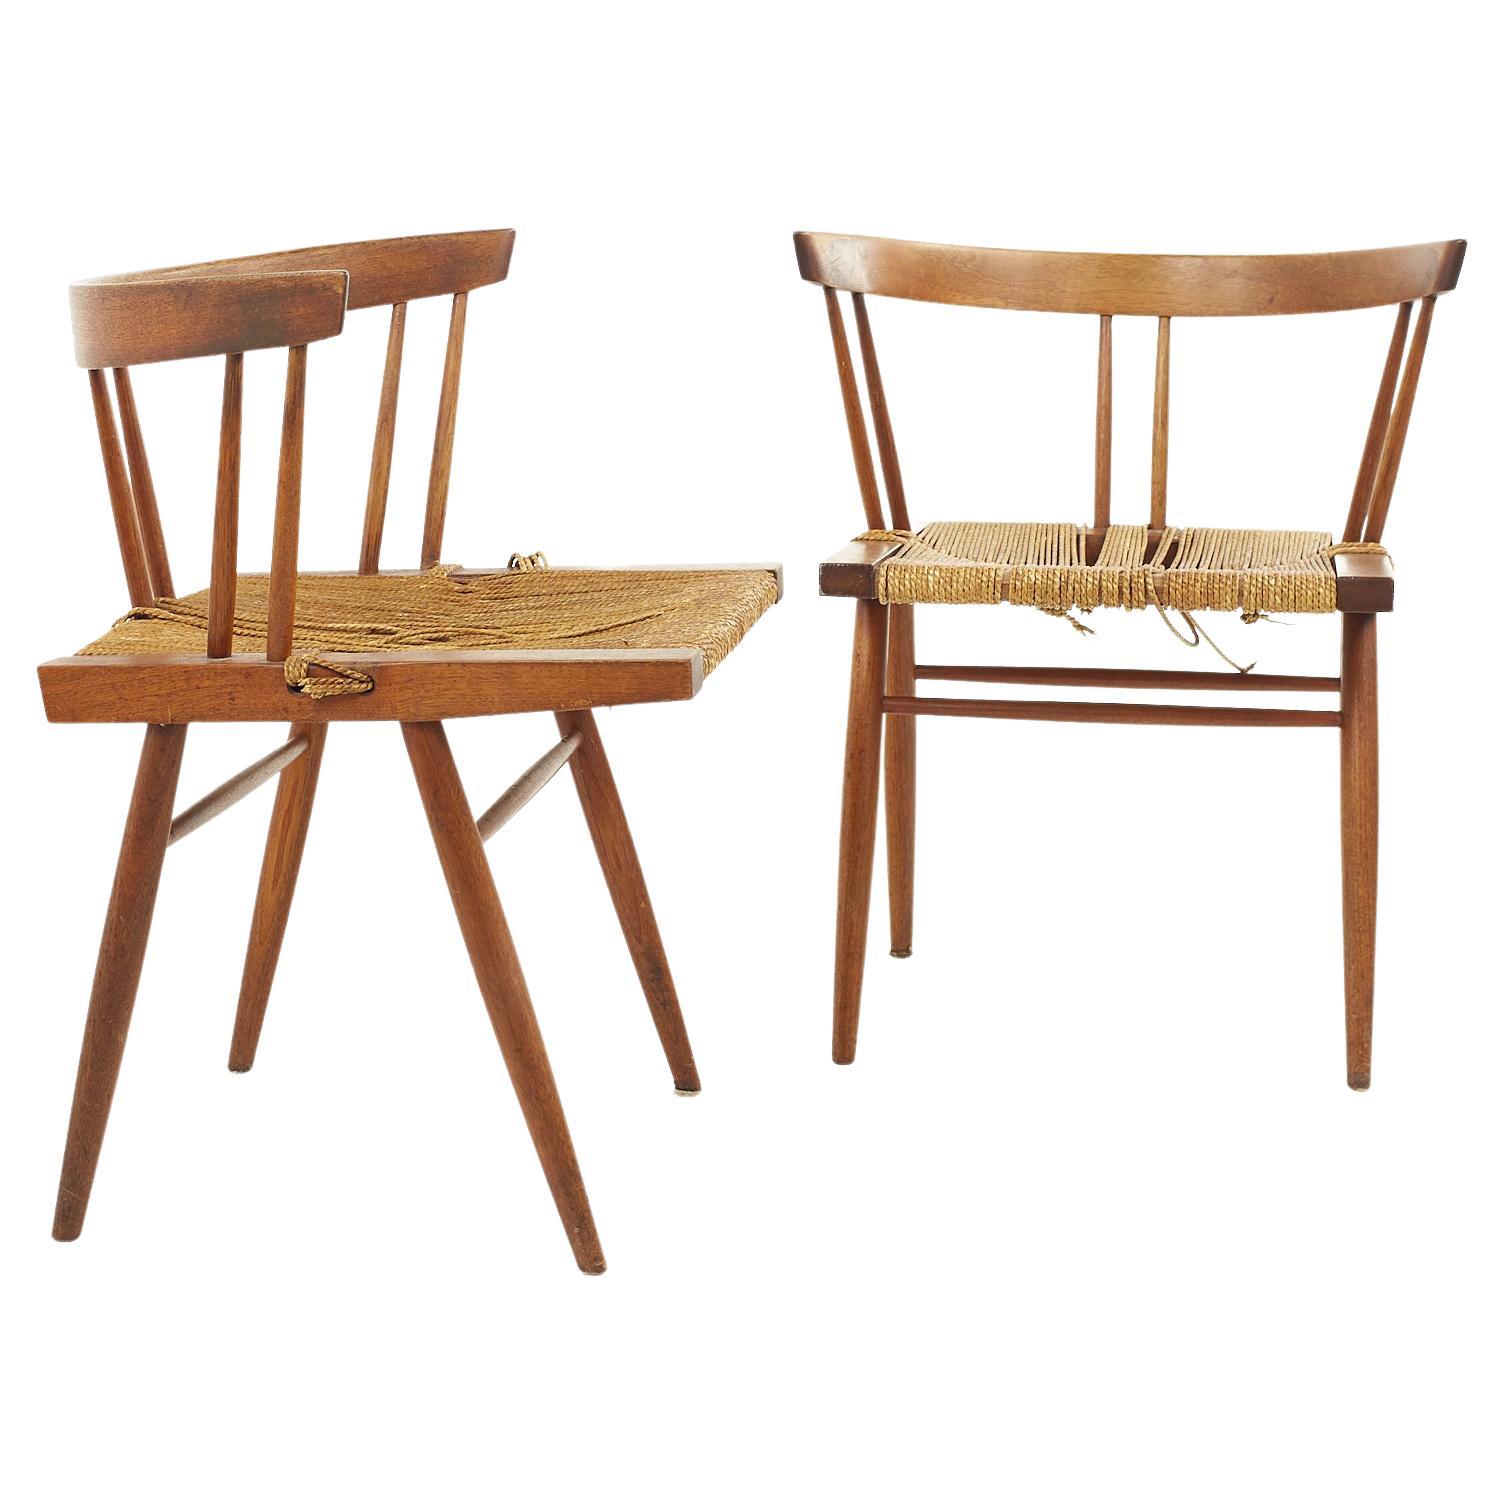 George Nakashima Mid Century Grass Chairm, a Pair